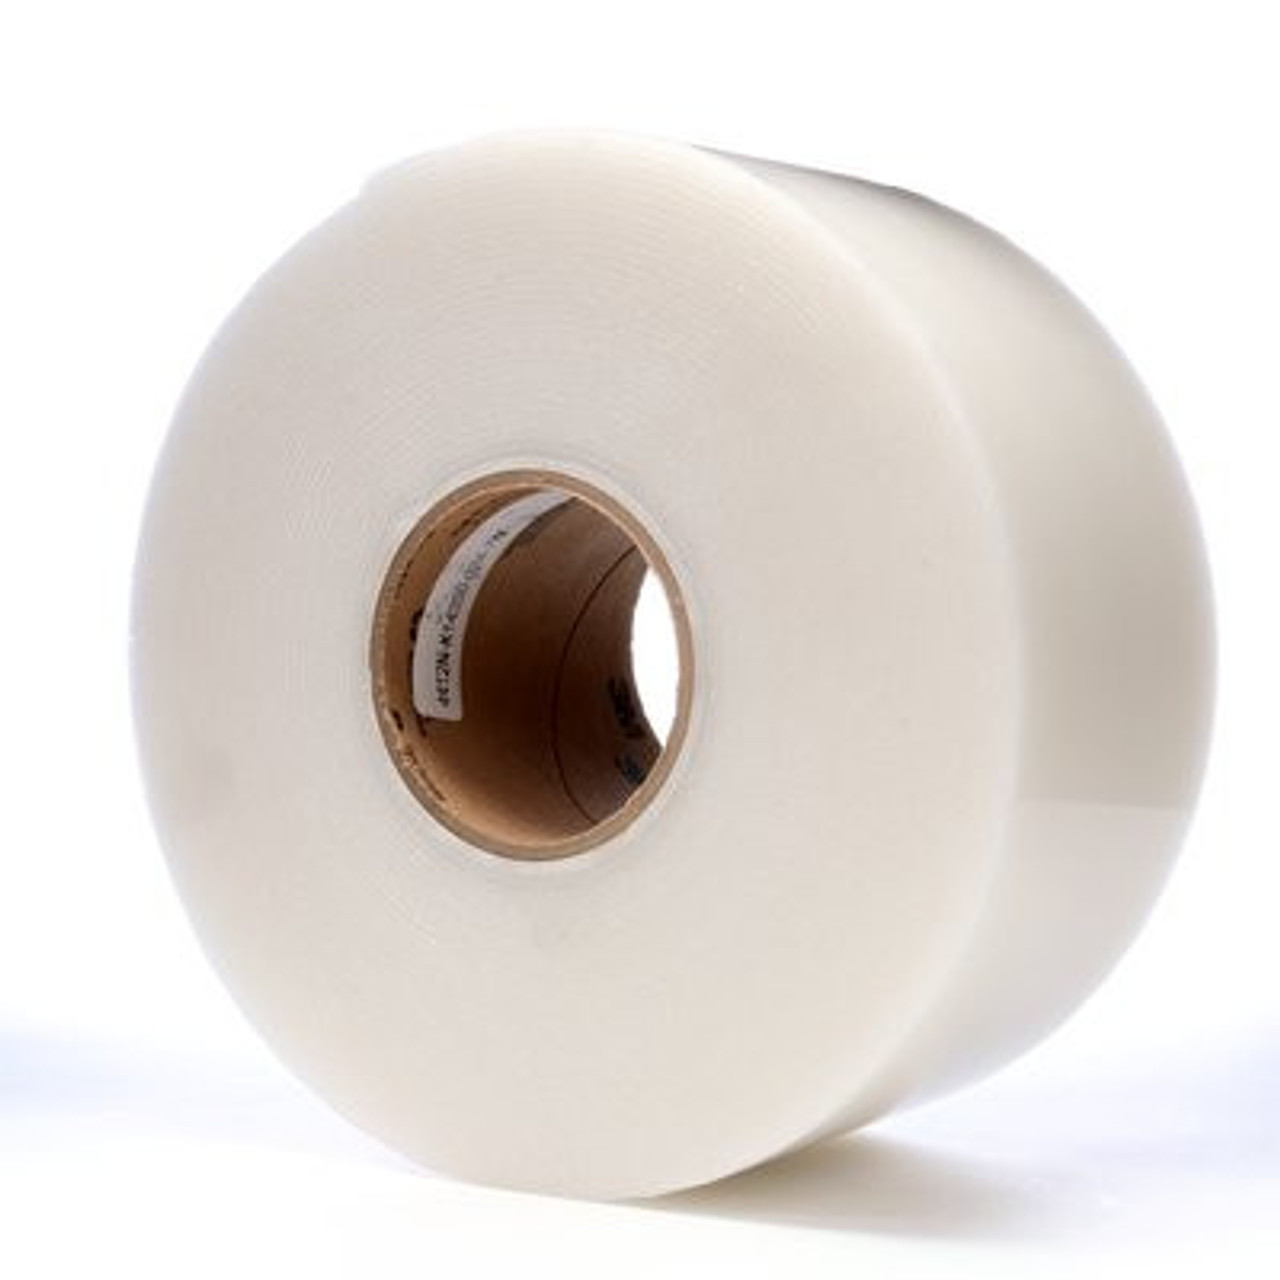 3M™ Extreme Sealing Tape 4412N, Translucent, 1 in x 18 yd, 80 mil